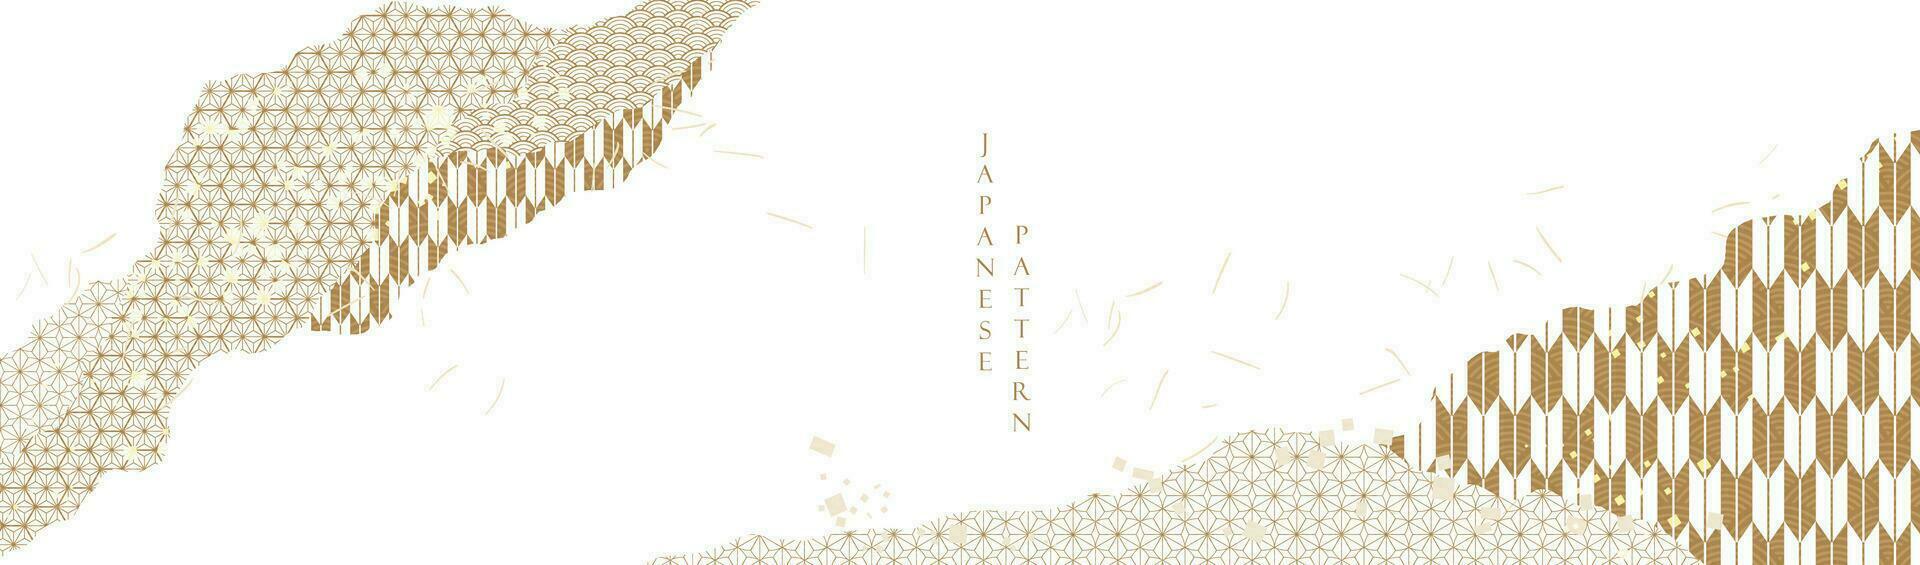 Japanese background with abstract art decoration vector. geometric pattern with gold and brown texture banner design in vintage style. vector